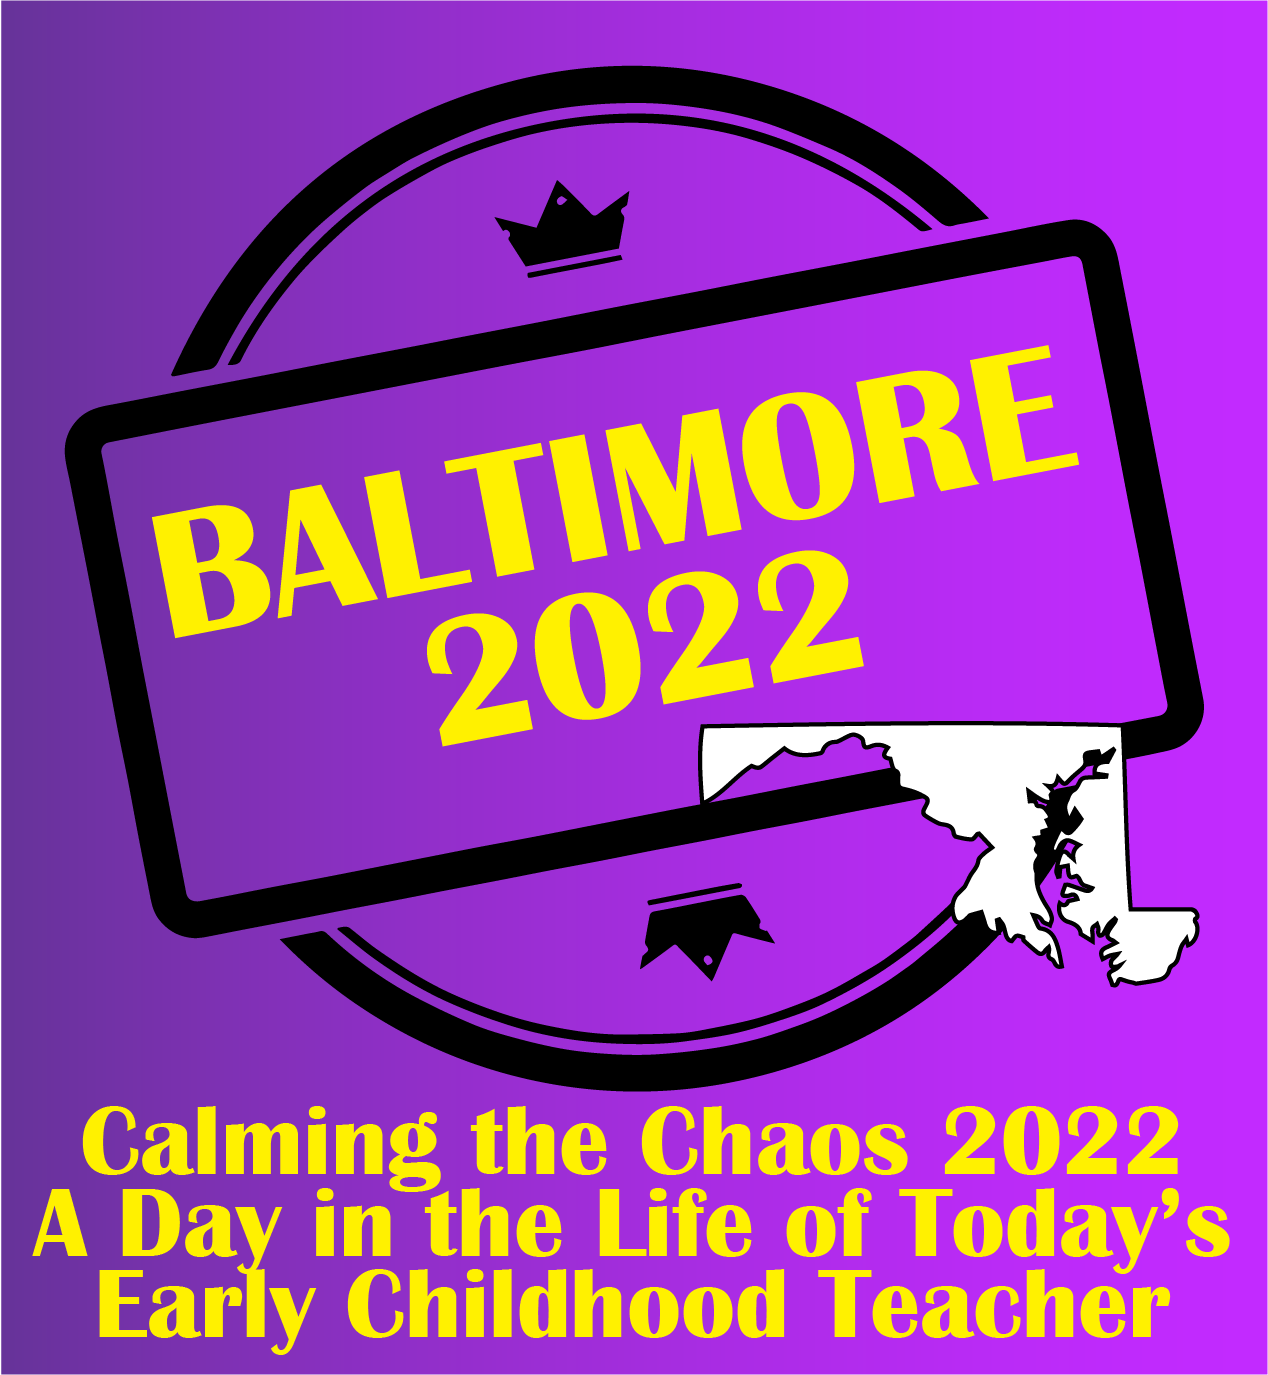 Image for Calming the Chaos 2022 - Baltimore